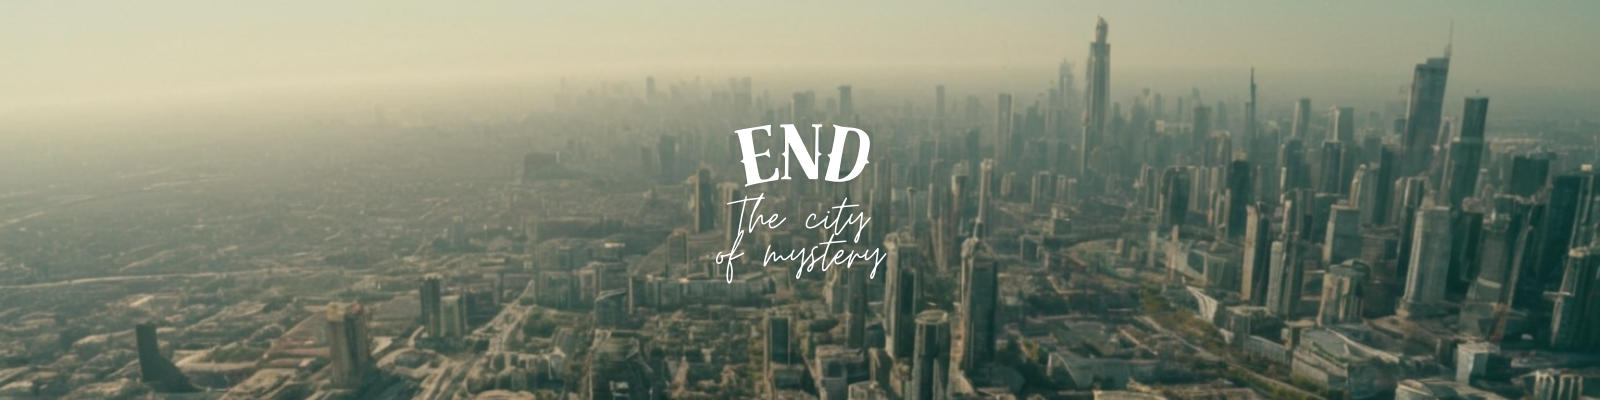 End poster